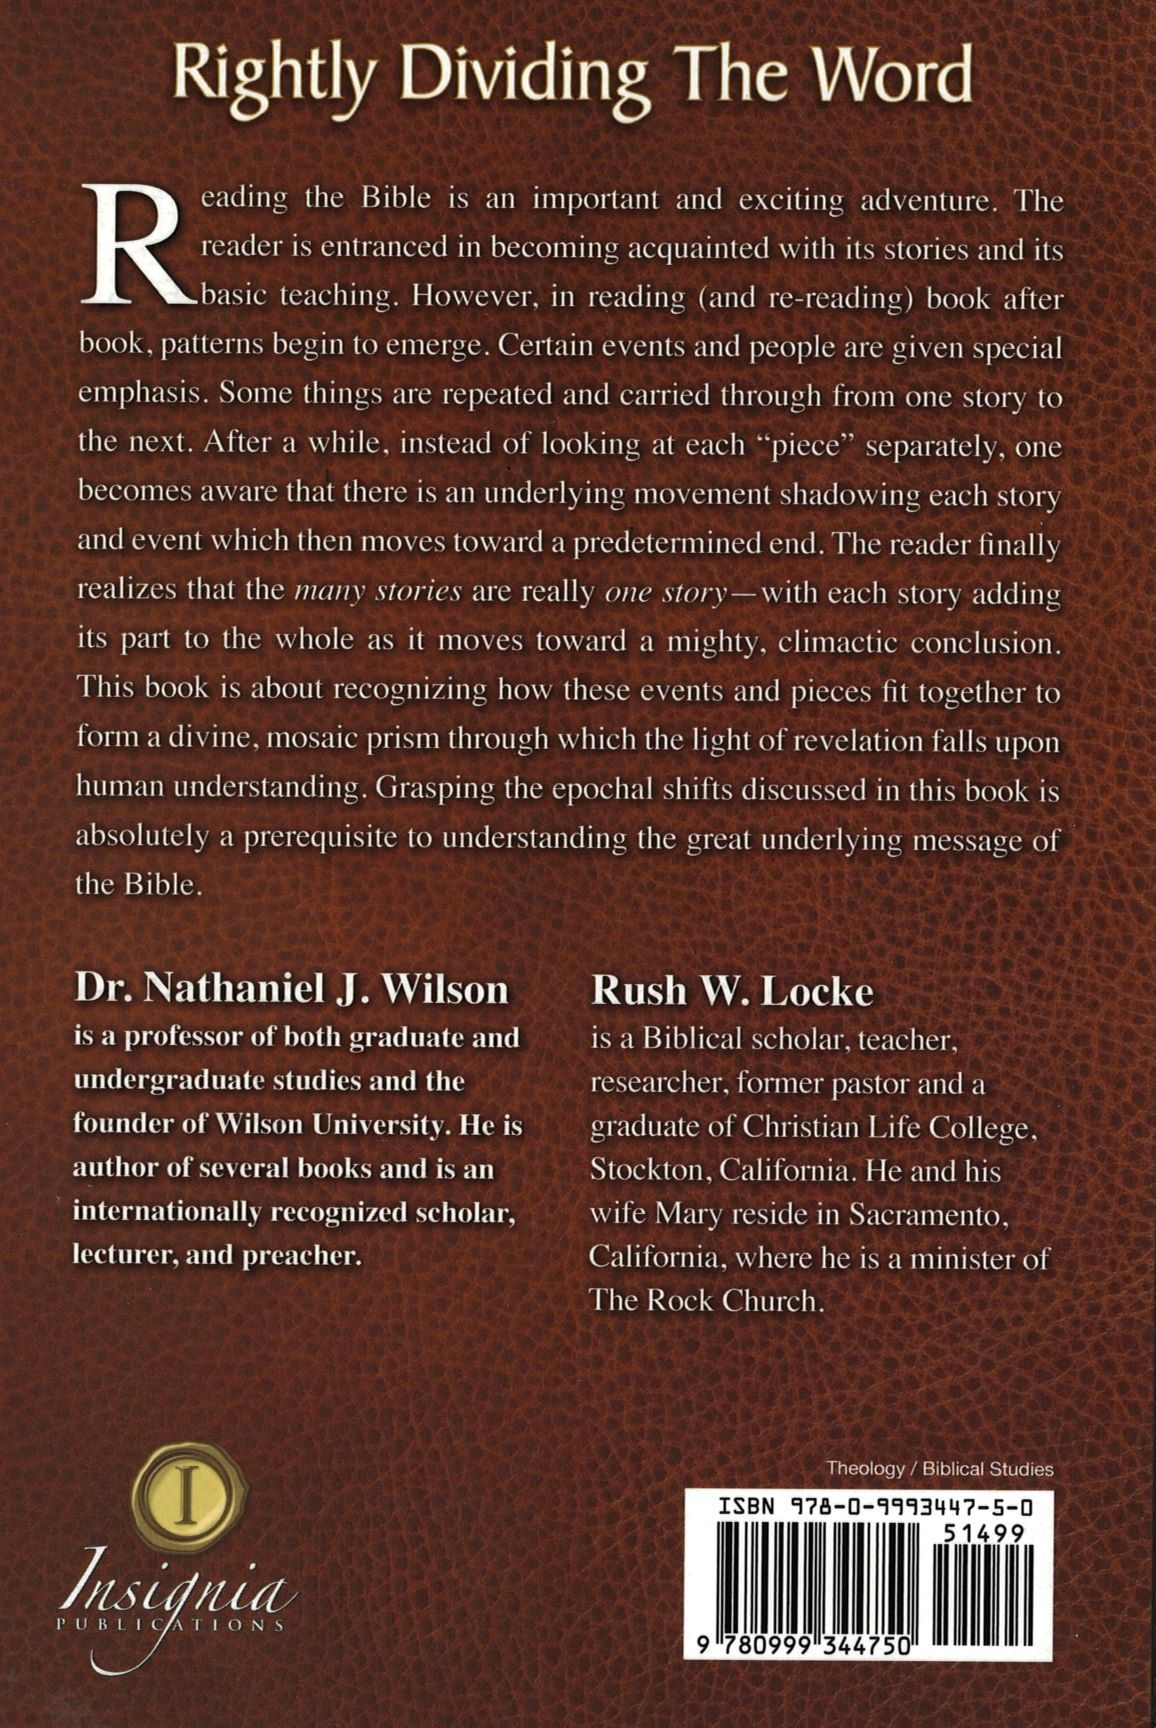 Rightly Dividing the Word - Nathaniel J. Wilson (Paperback)